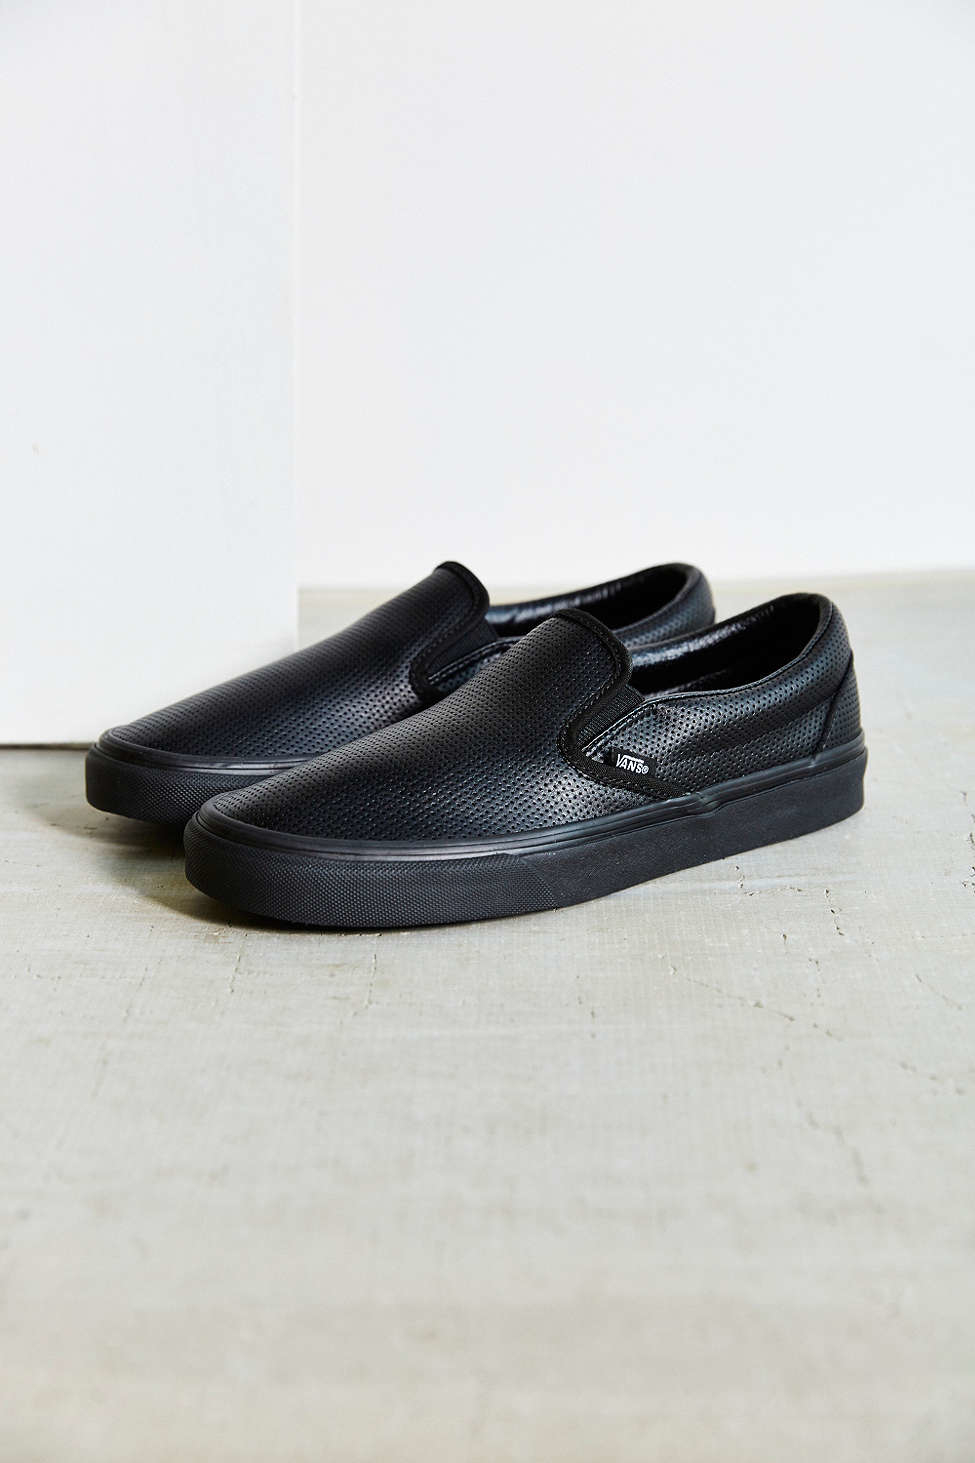 Vans Perforated Leather Classic Slip-on Shoe in Black - Lyst